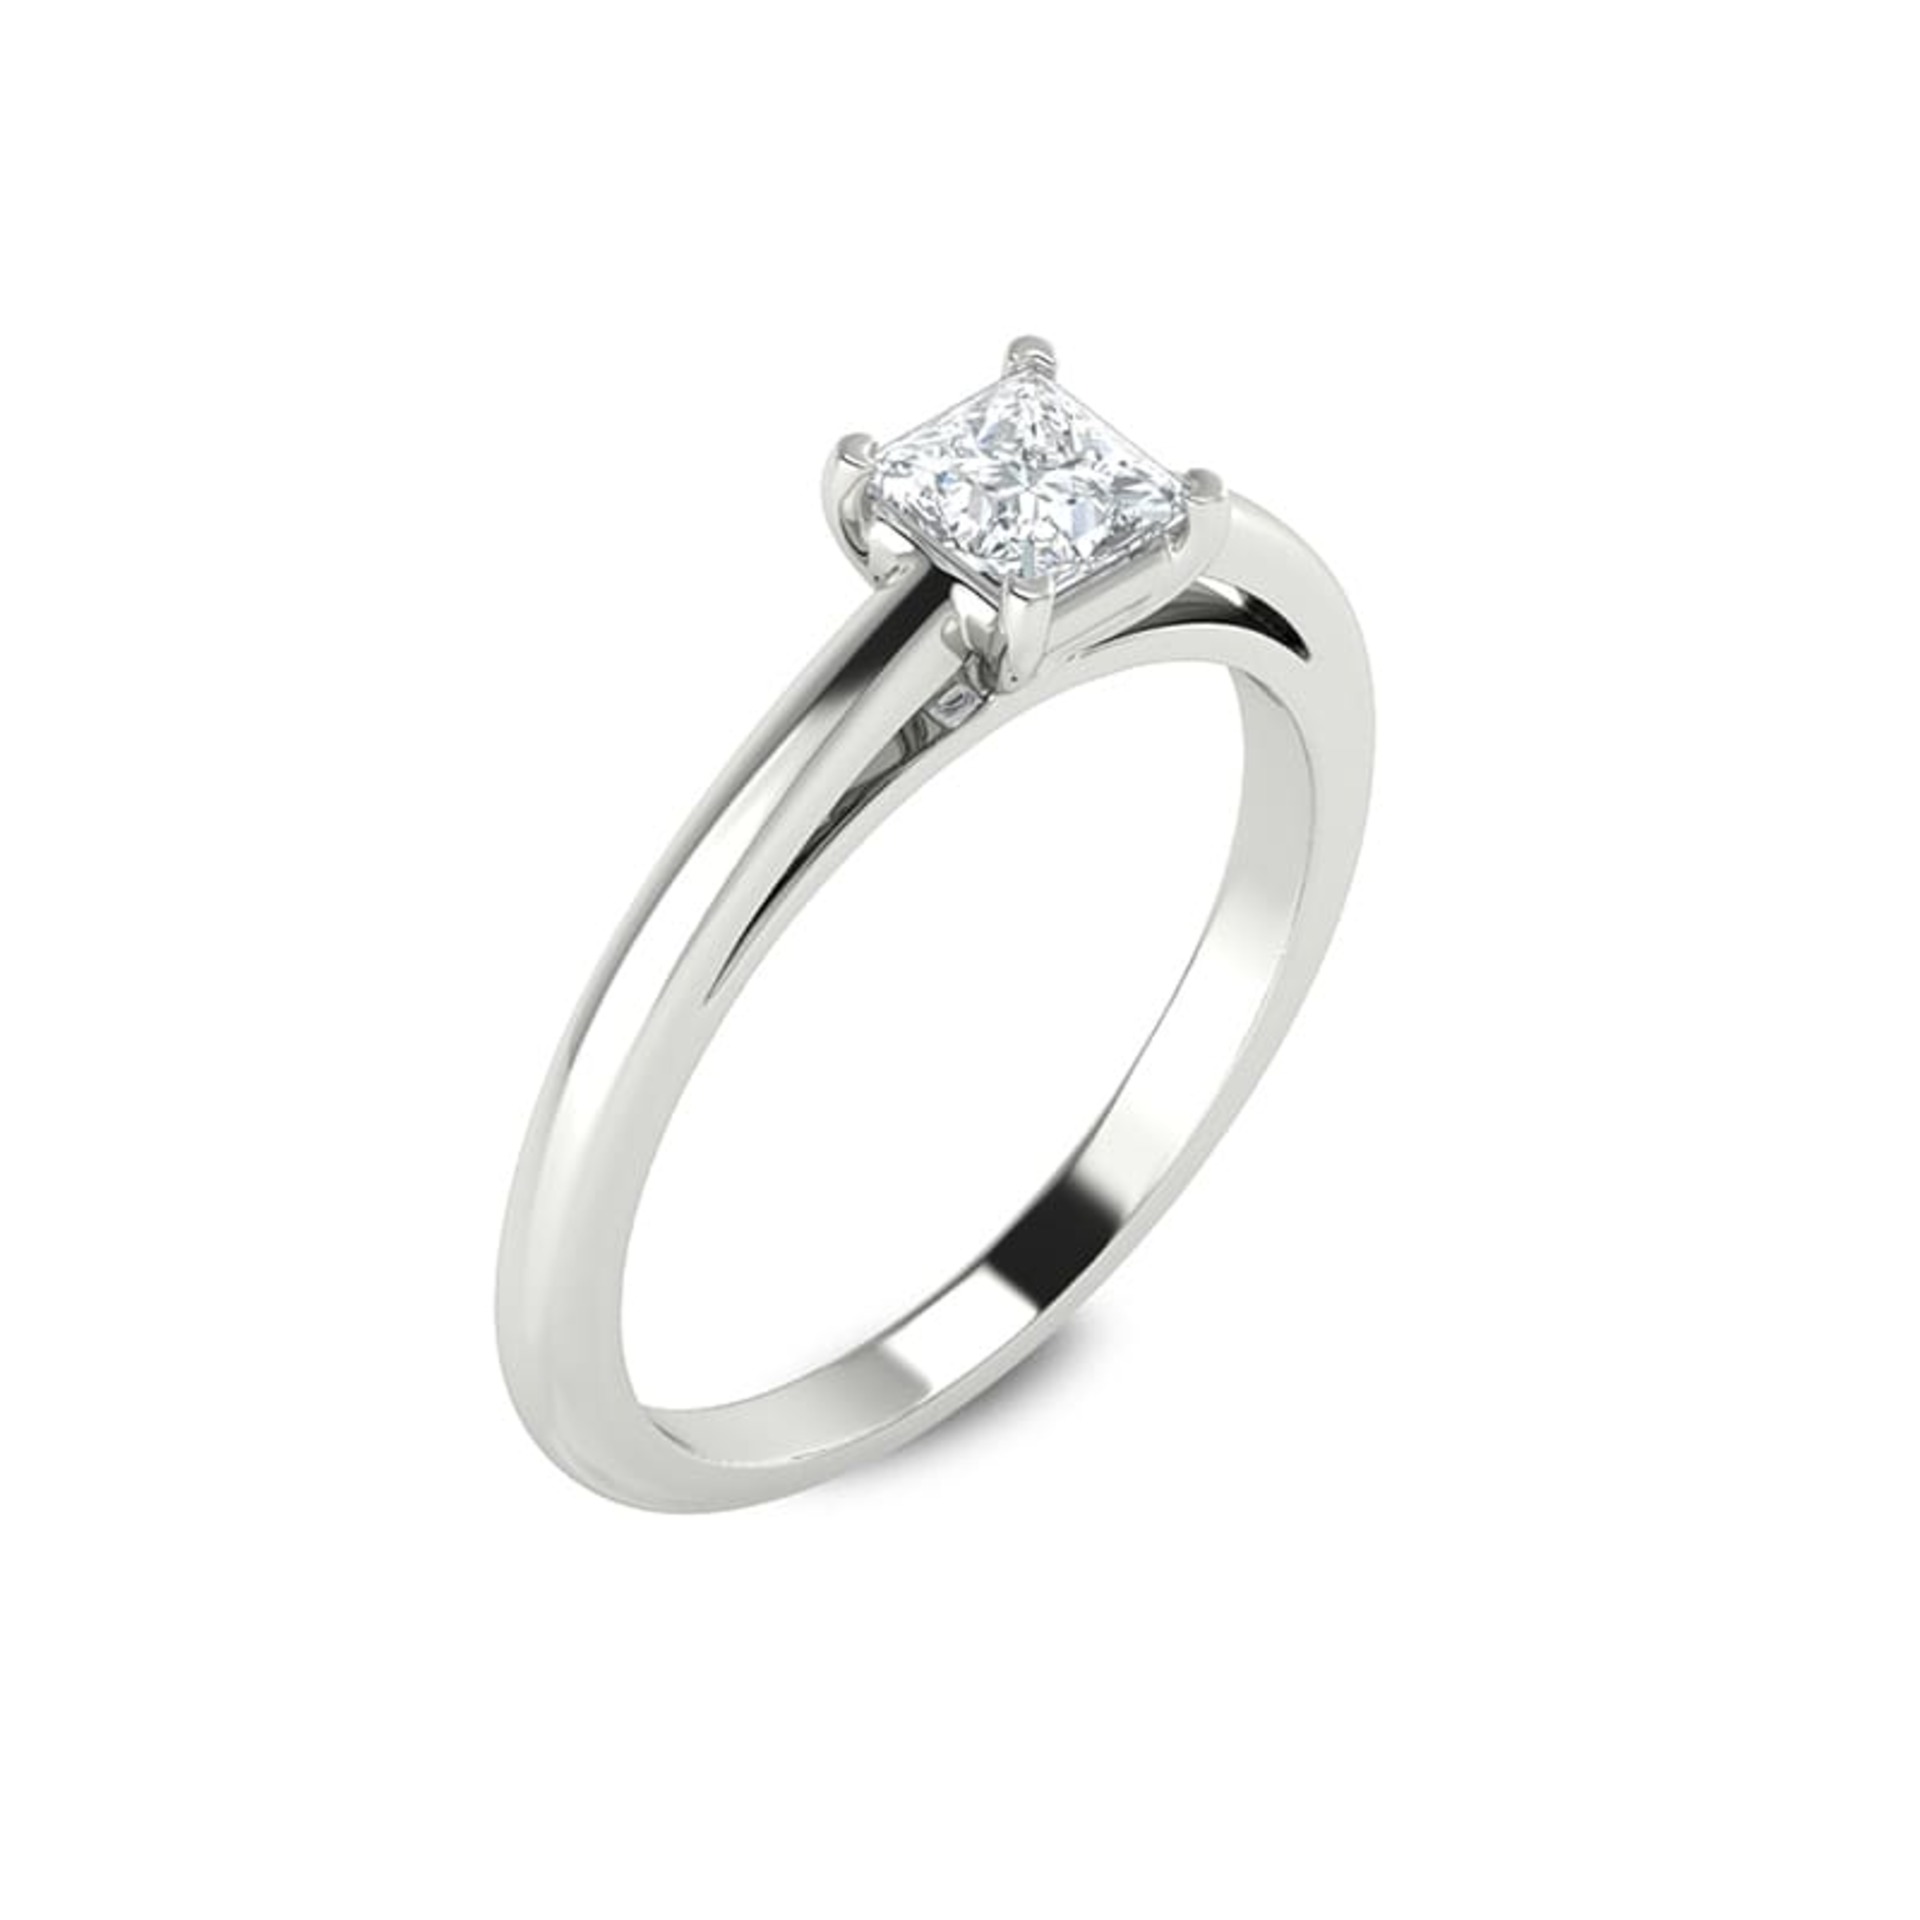 Engagement ring Classics Diamond White Gold Princess 4 Claws